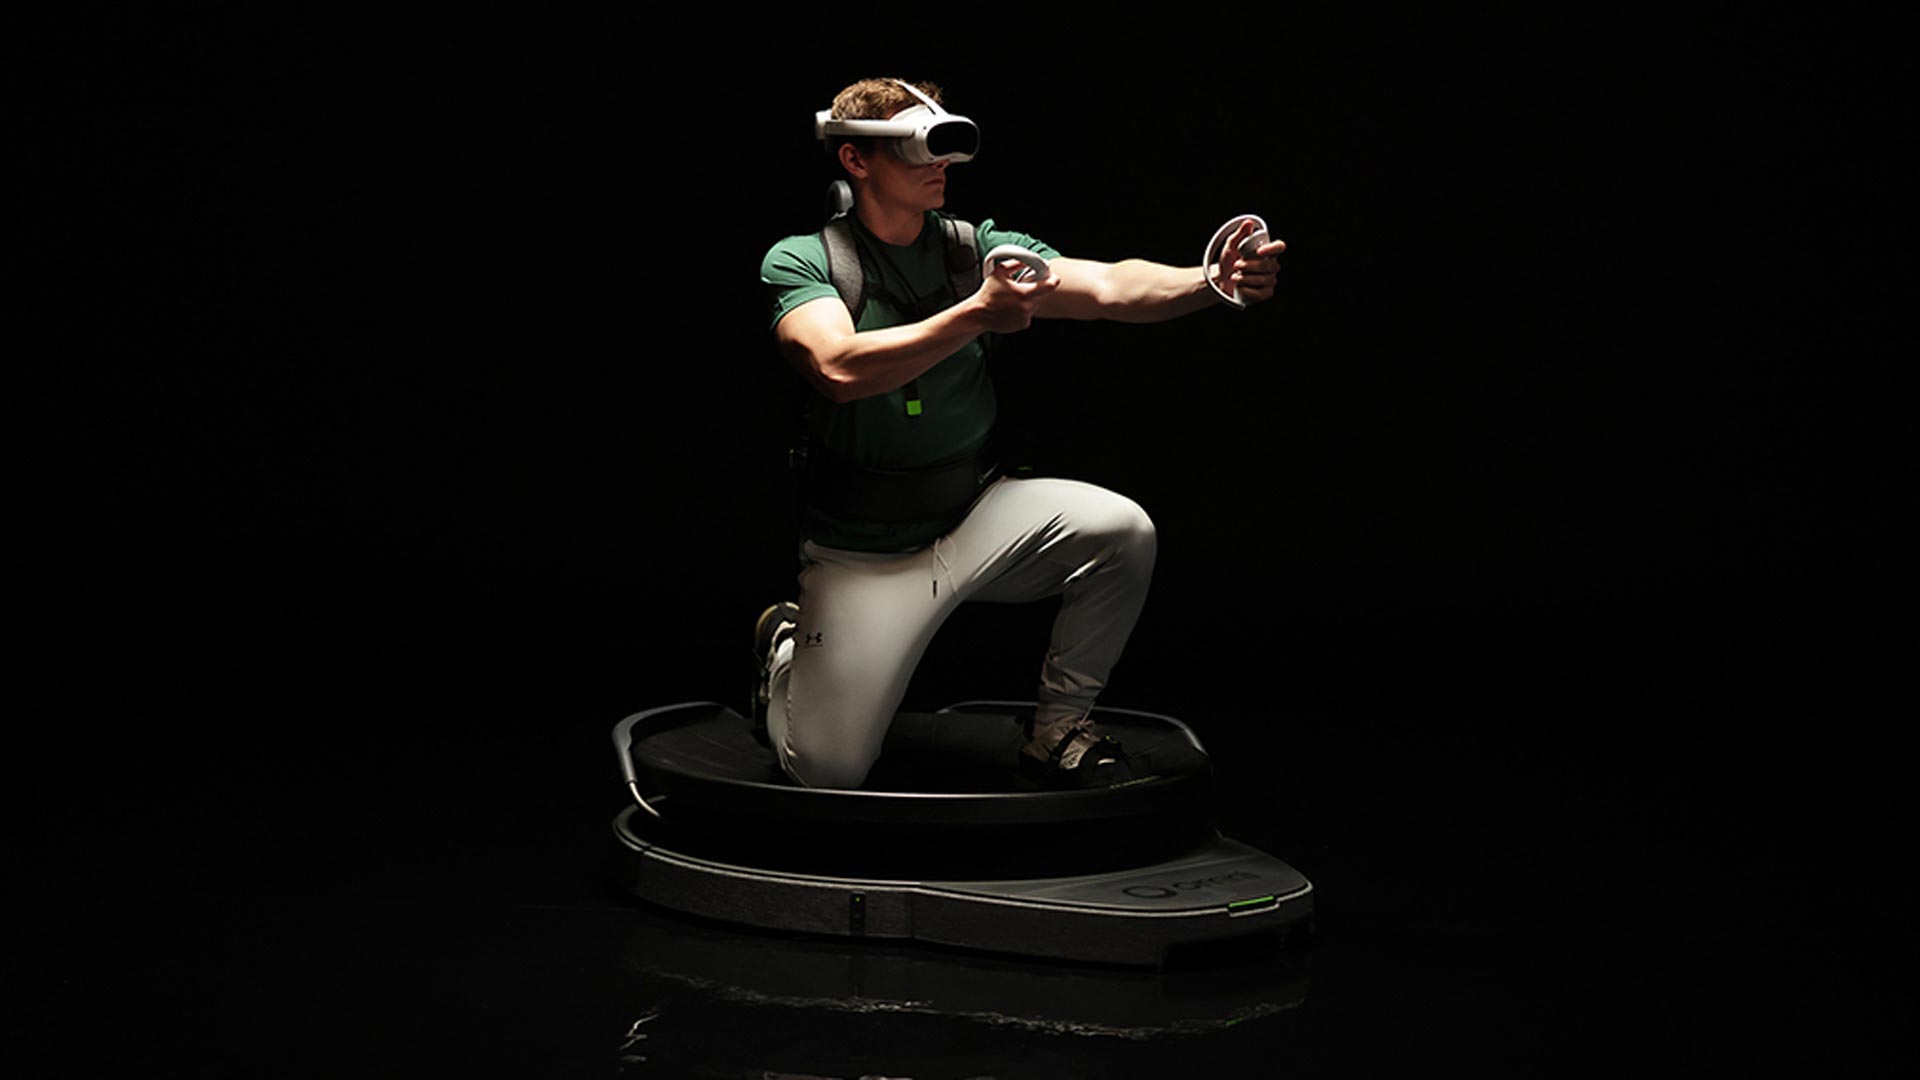 Virtuix Raises $4.7M in Latest Crowd Investment Round, Plans to Ship 1,000 VR Treadmills by Year’s End – Road to VR